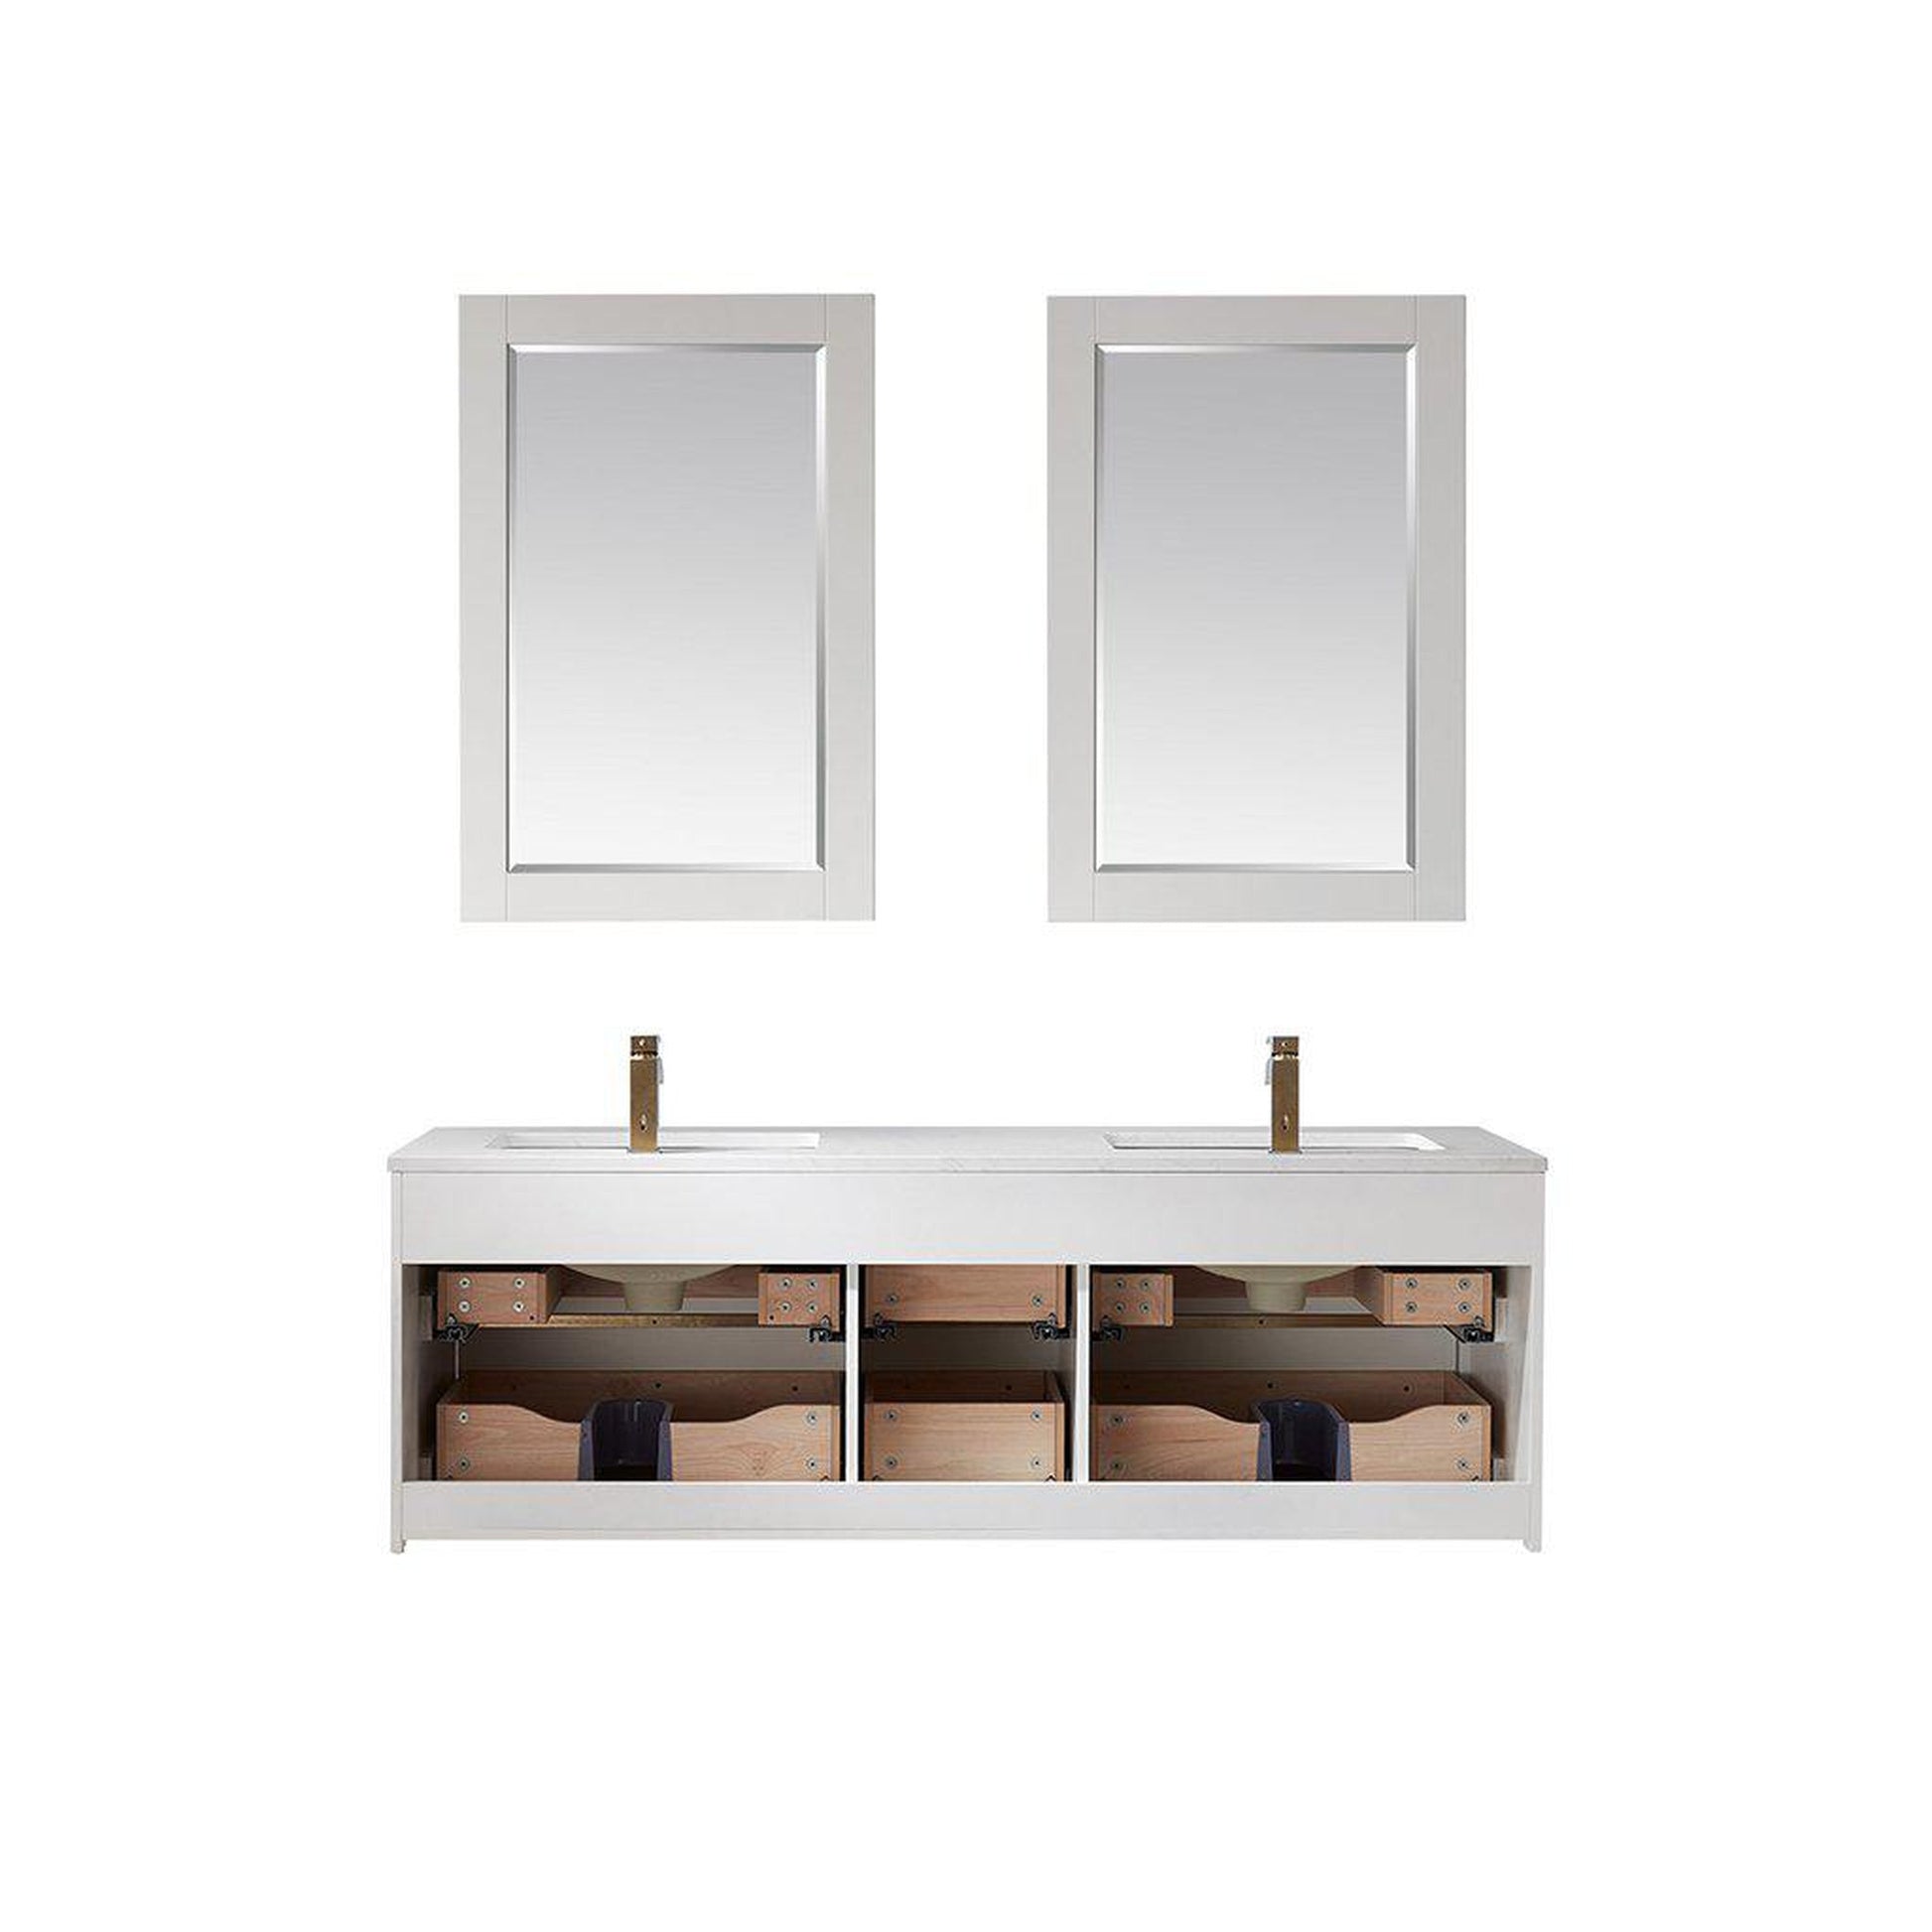 Altair Morgan 60" Double White Wall-Mounted Bathroom Vanity Set With Mirror, Aosta White Composite Stone Top, Two Rectangular Undermount Ceramic Sinks, and Overflow